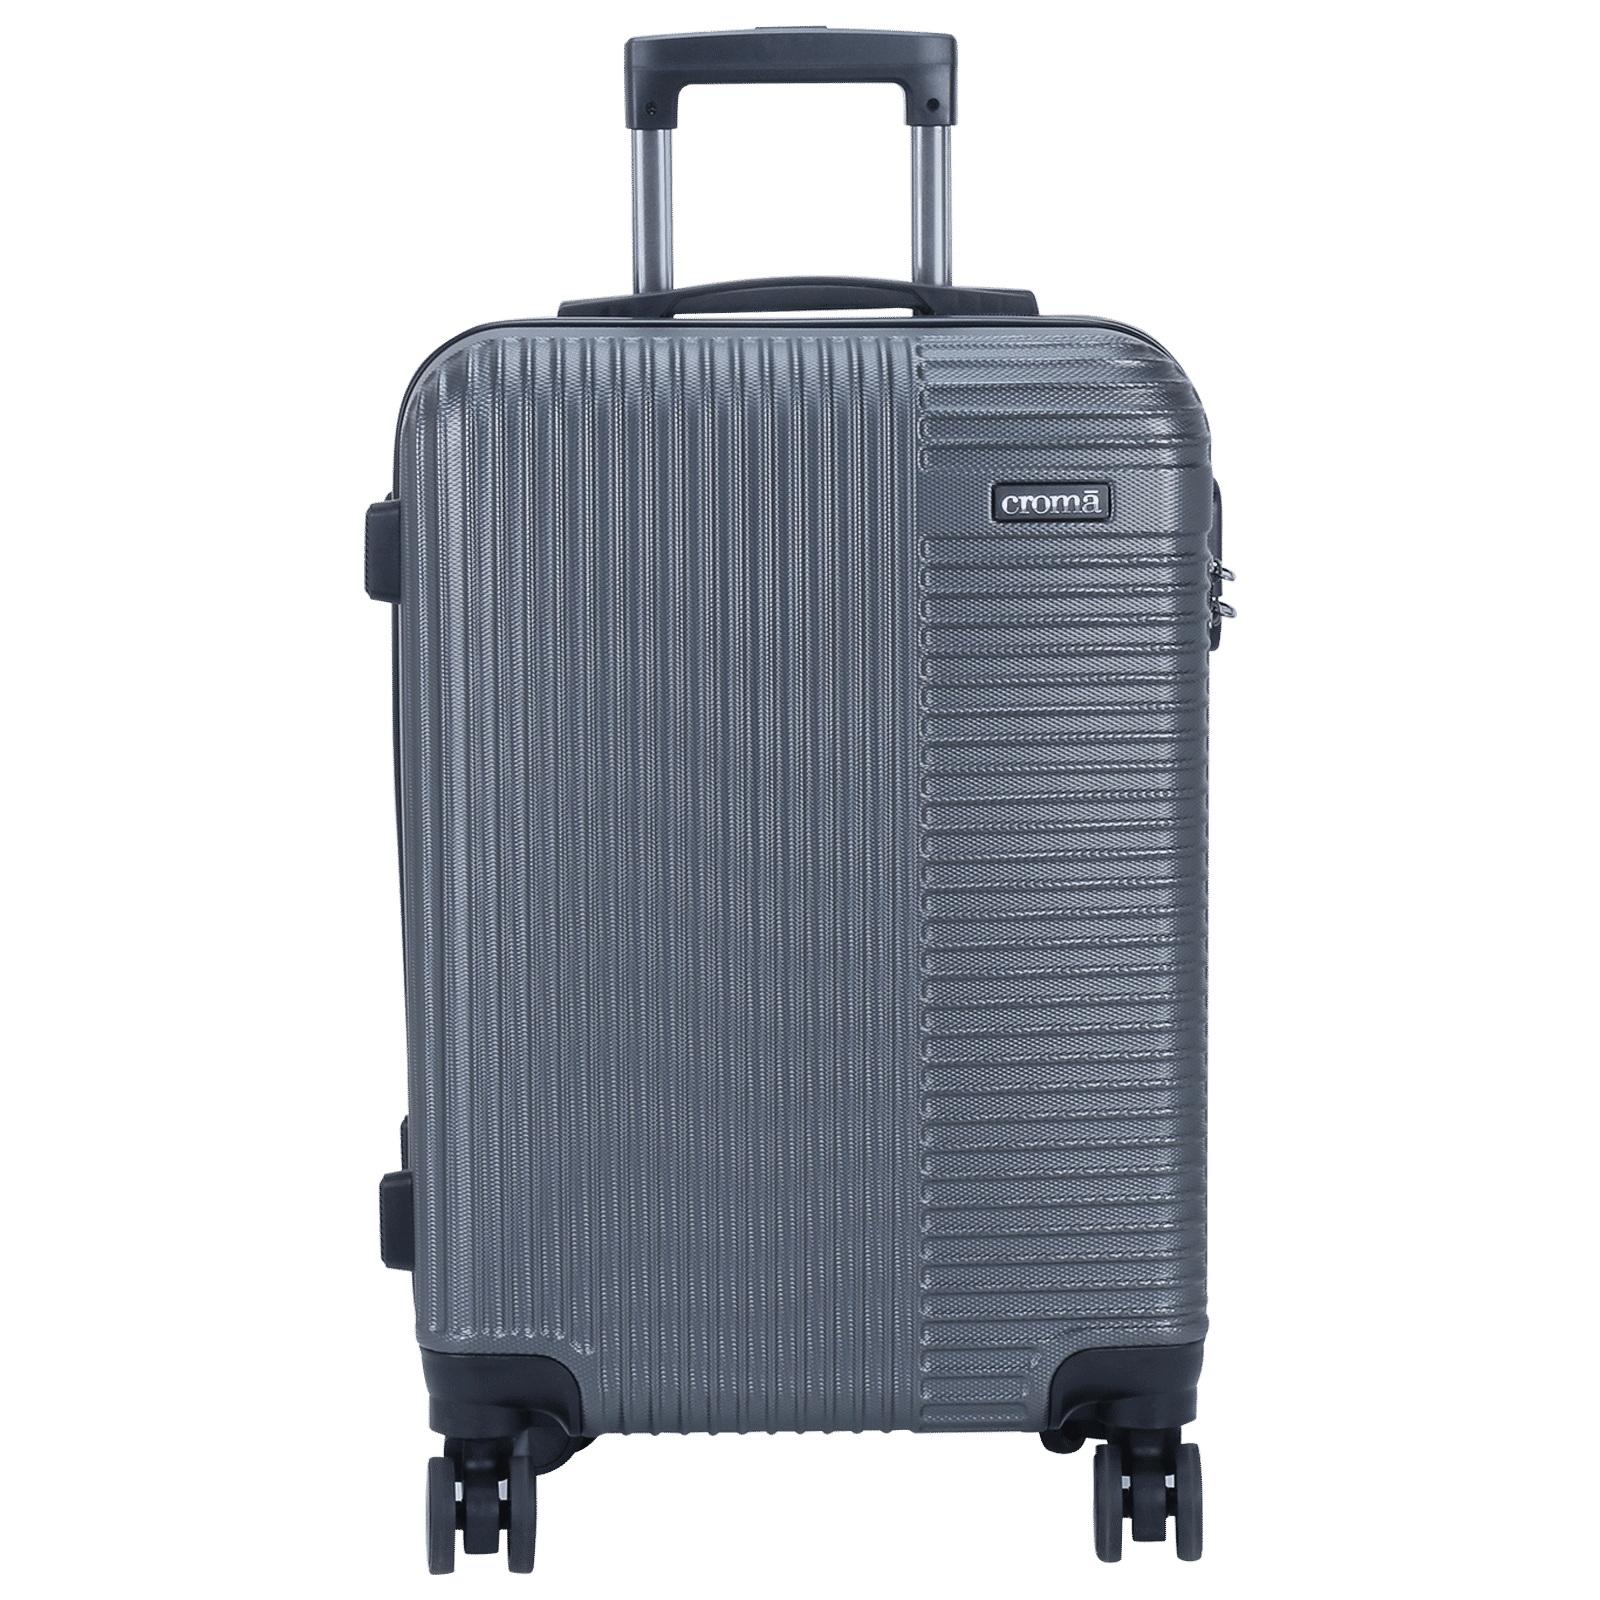 Shop Affordable Cabin Luggage Travel Trolley Bags in navy blue